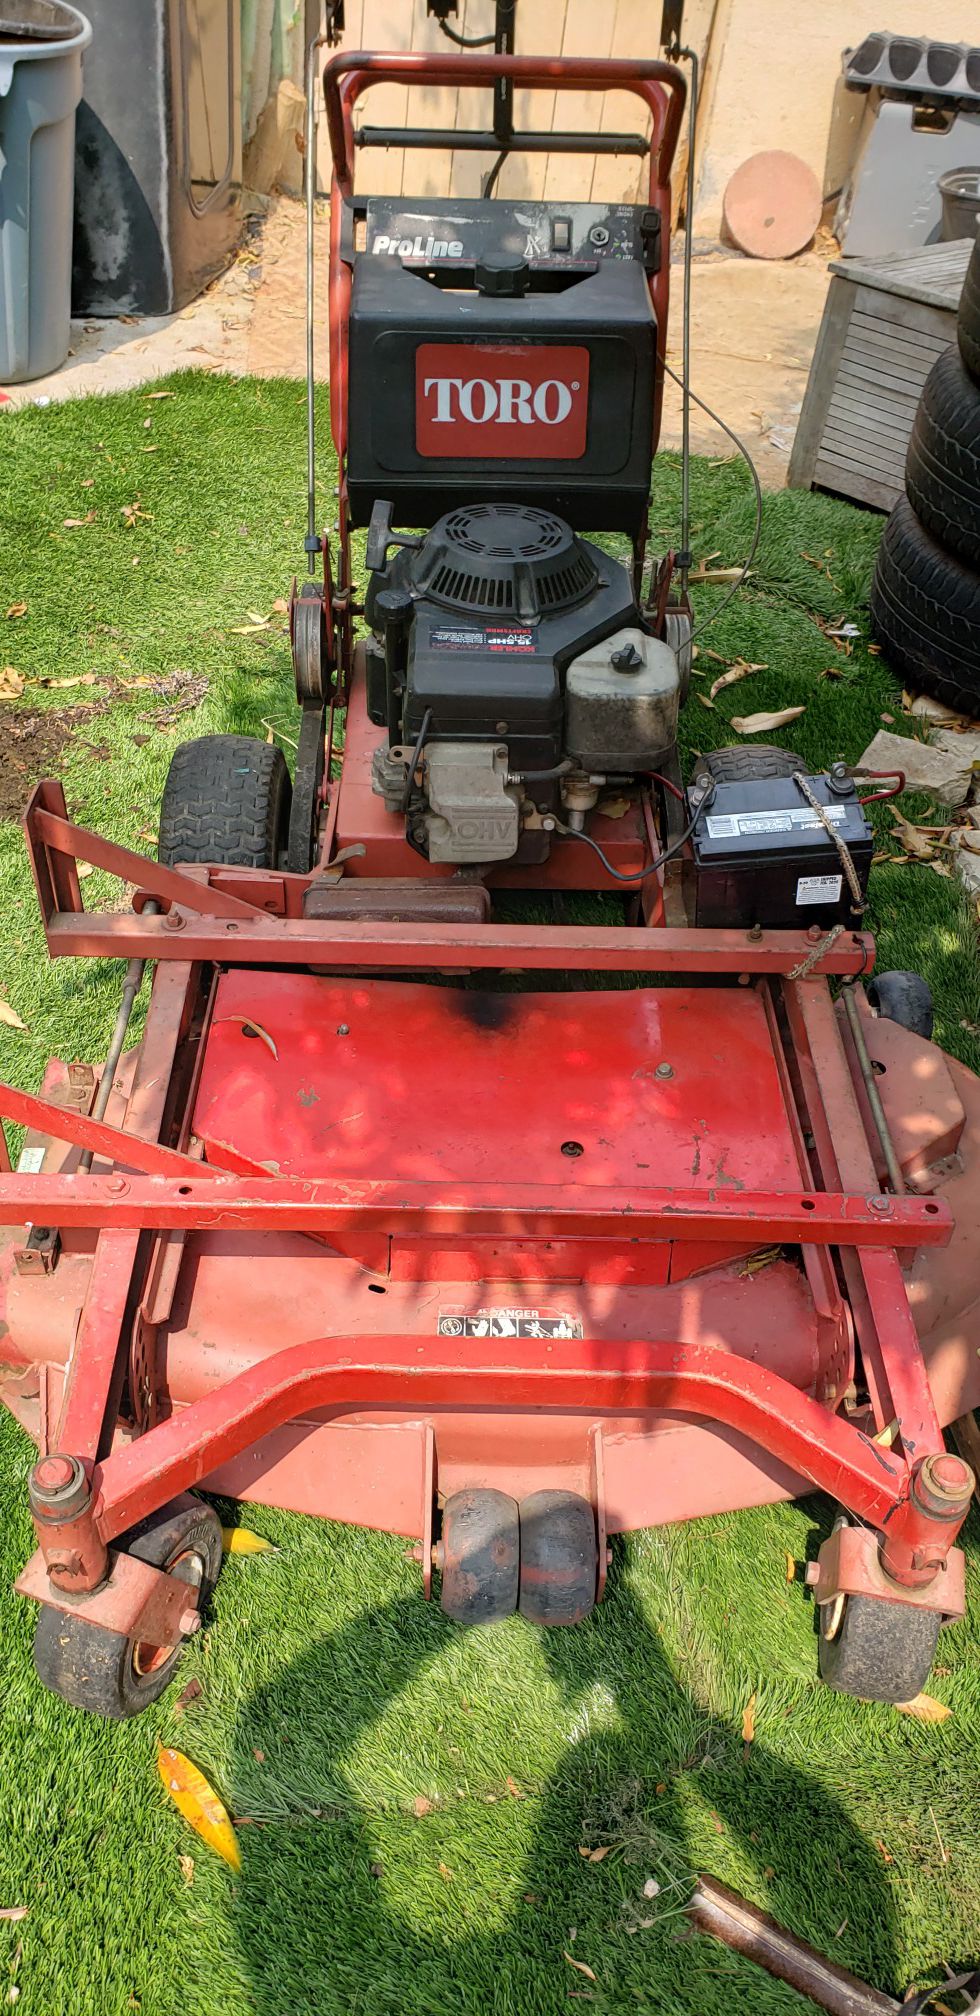 comercial lawn mower 3 blades toro proline works really good